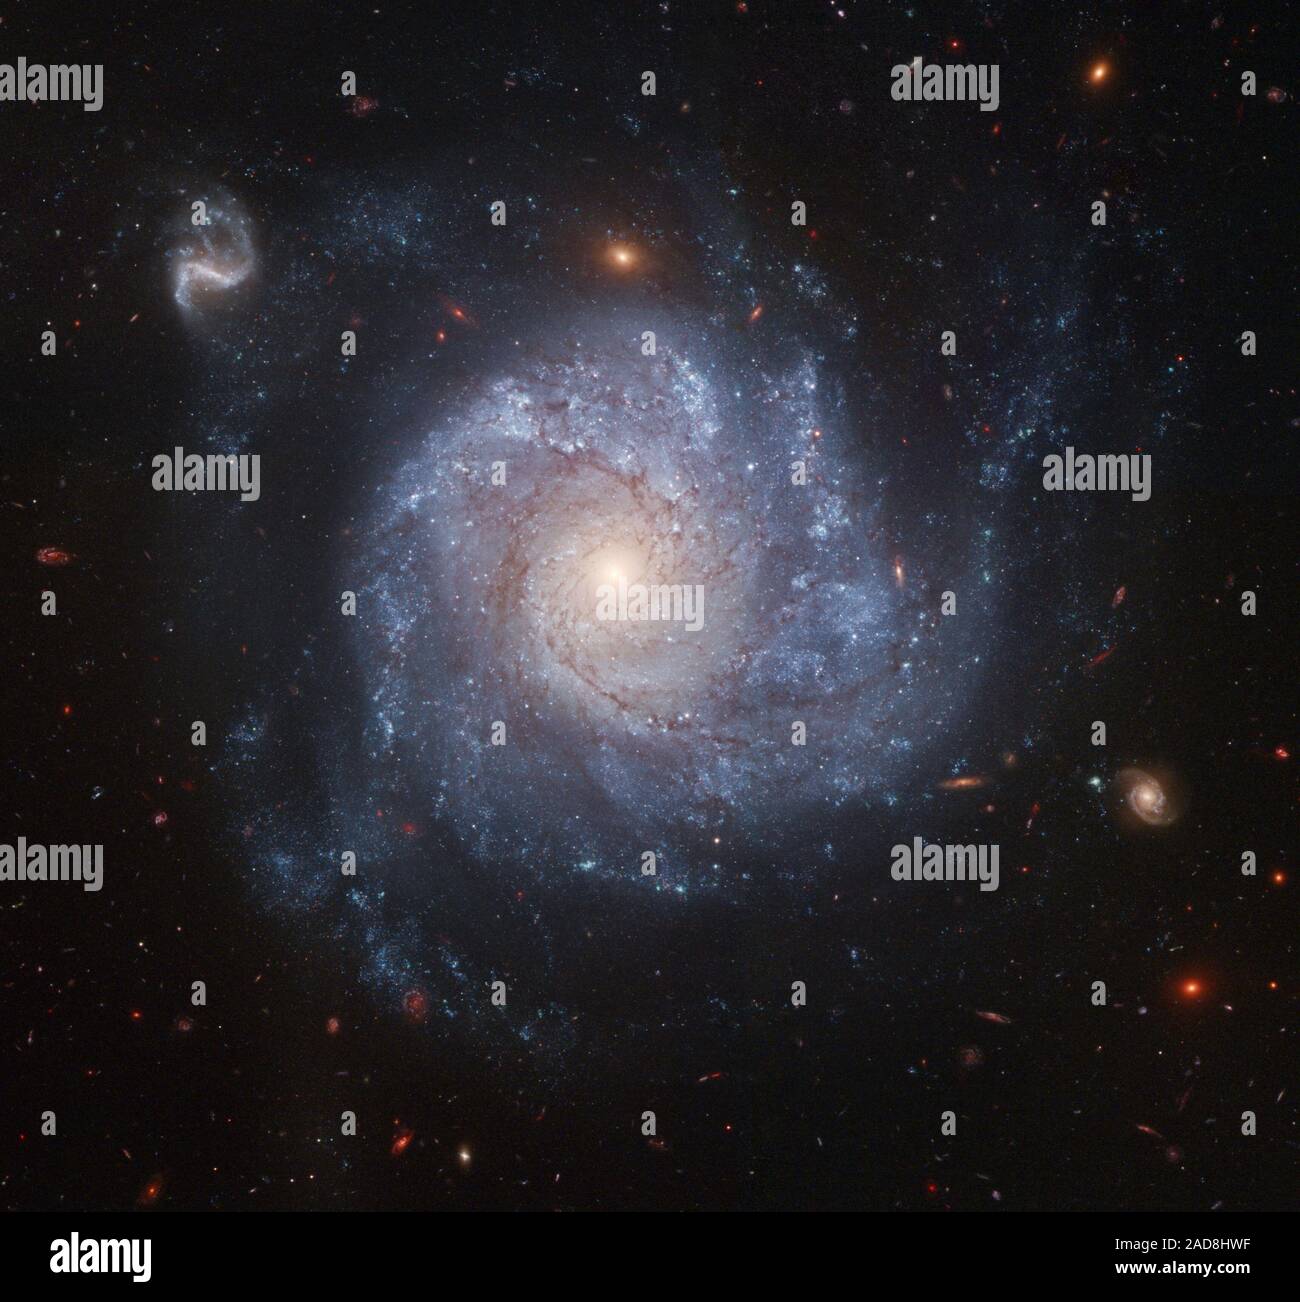 Looking like a child's pinwheel ready to be set a spinning by a gentle breeze, this dramatic spiral galaxy is one of the latest viewed by NASA's Hubble Space Telescope. Stunning details of the face-on spiral galaxy, cataloged as NGC 1309, are captured in this color image.   Recent observations of the galaxy taken in visible and infrared light come together in a colorful depiction of many of the galaxy's features. Bright blue areas of star formation pepper the spiral arms, while ruddy dust lanes follow the spiral structure into a yellowish central nucleus of older-population stars. The image is Stock Photo